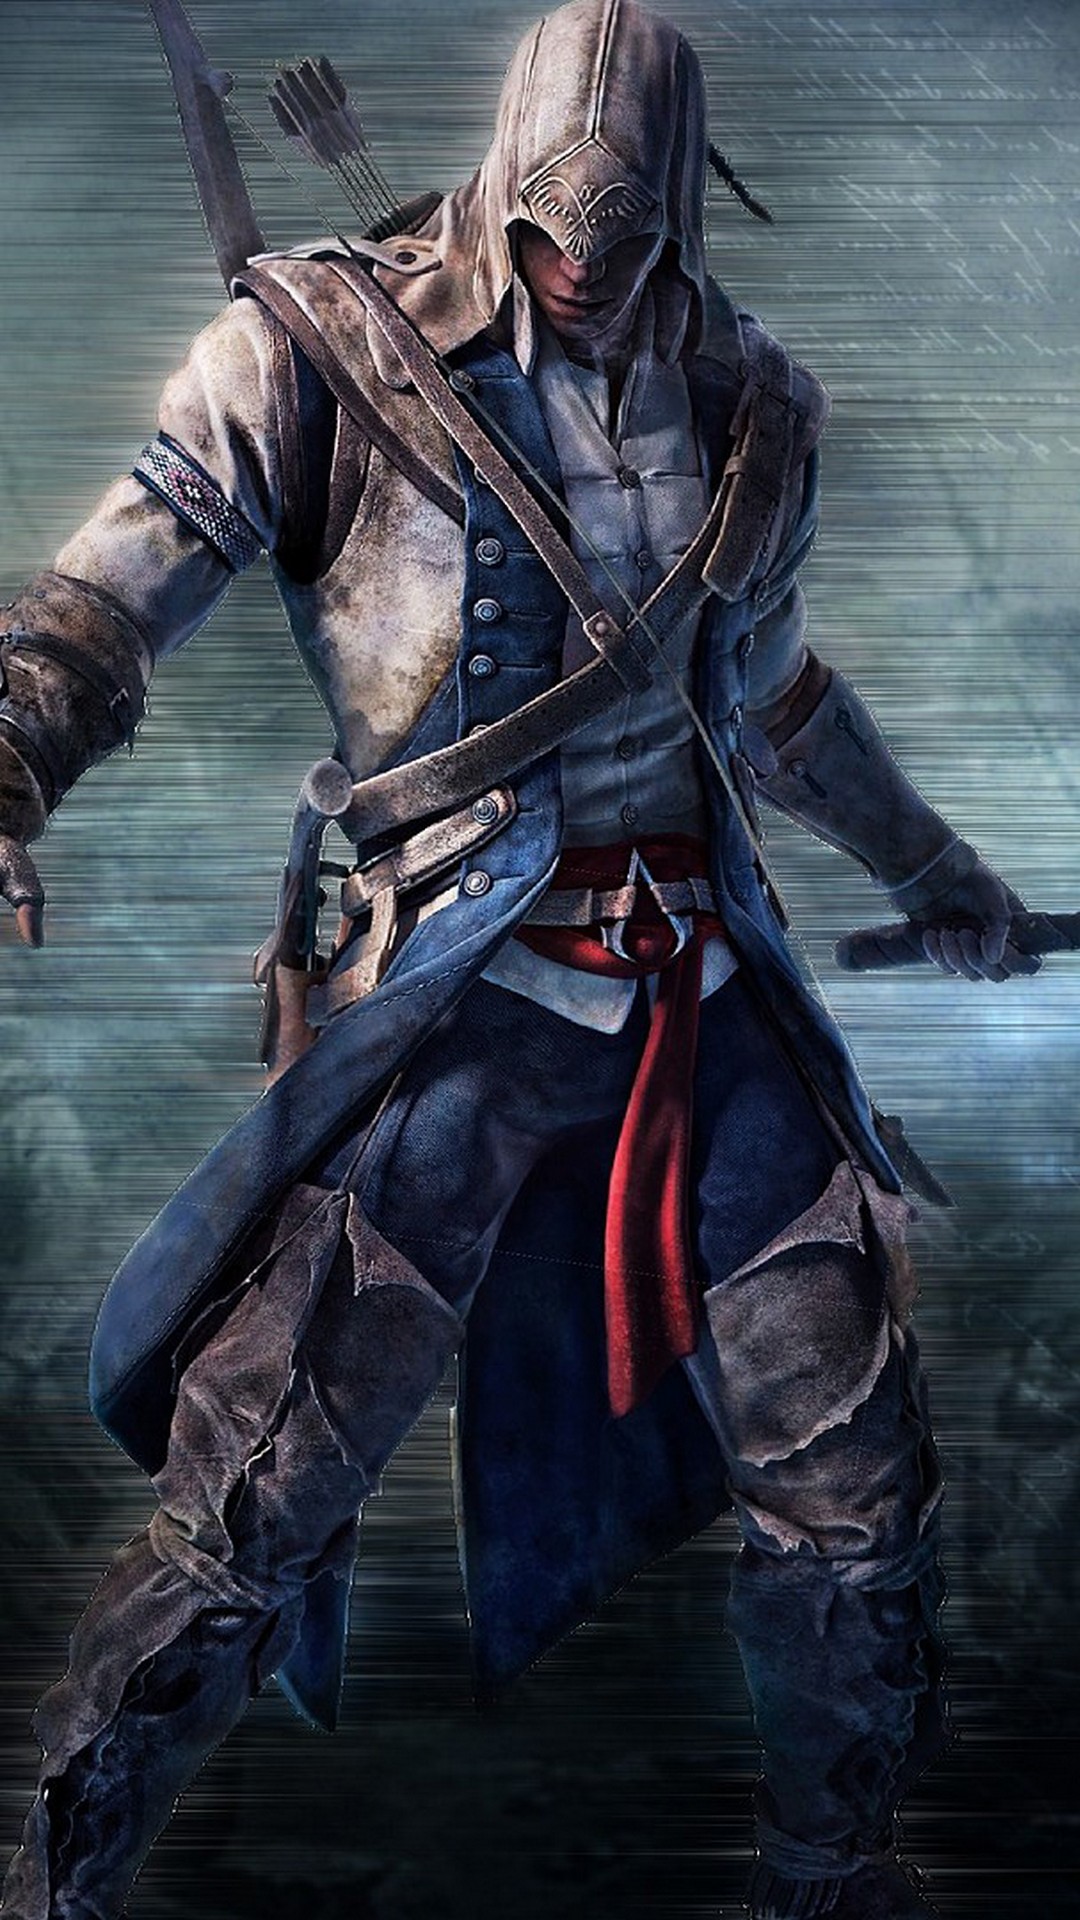 Download this Wallpaper iPhone 6 - Video Game/Assassin's